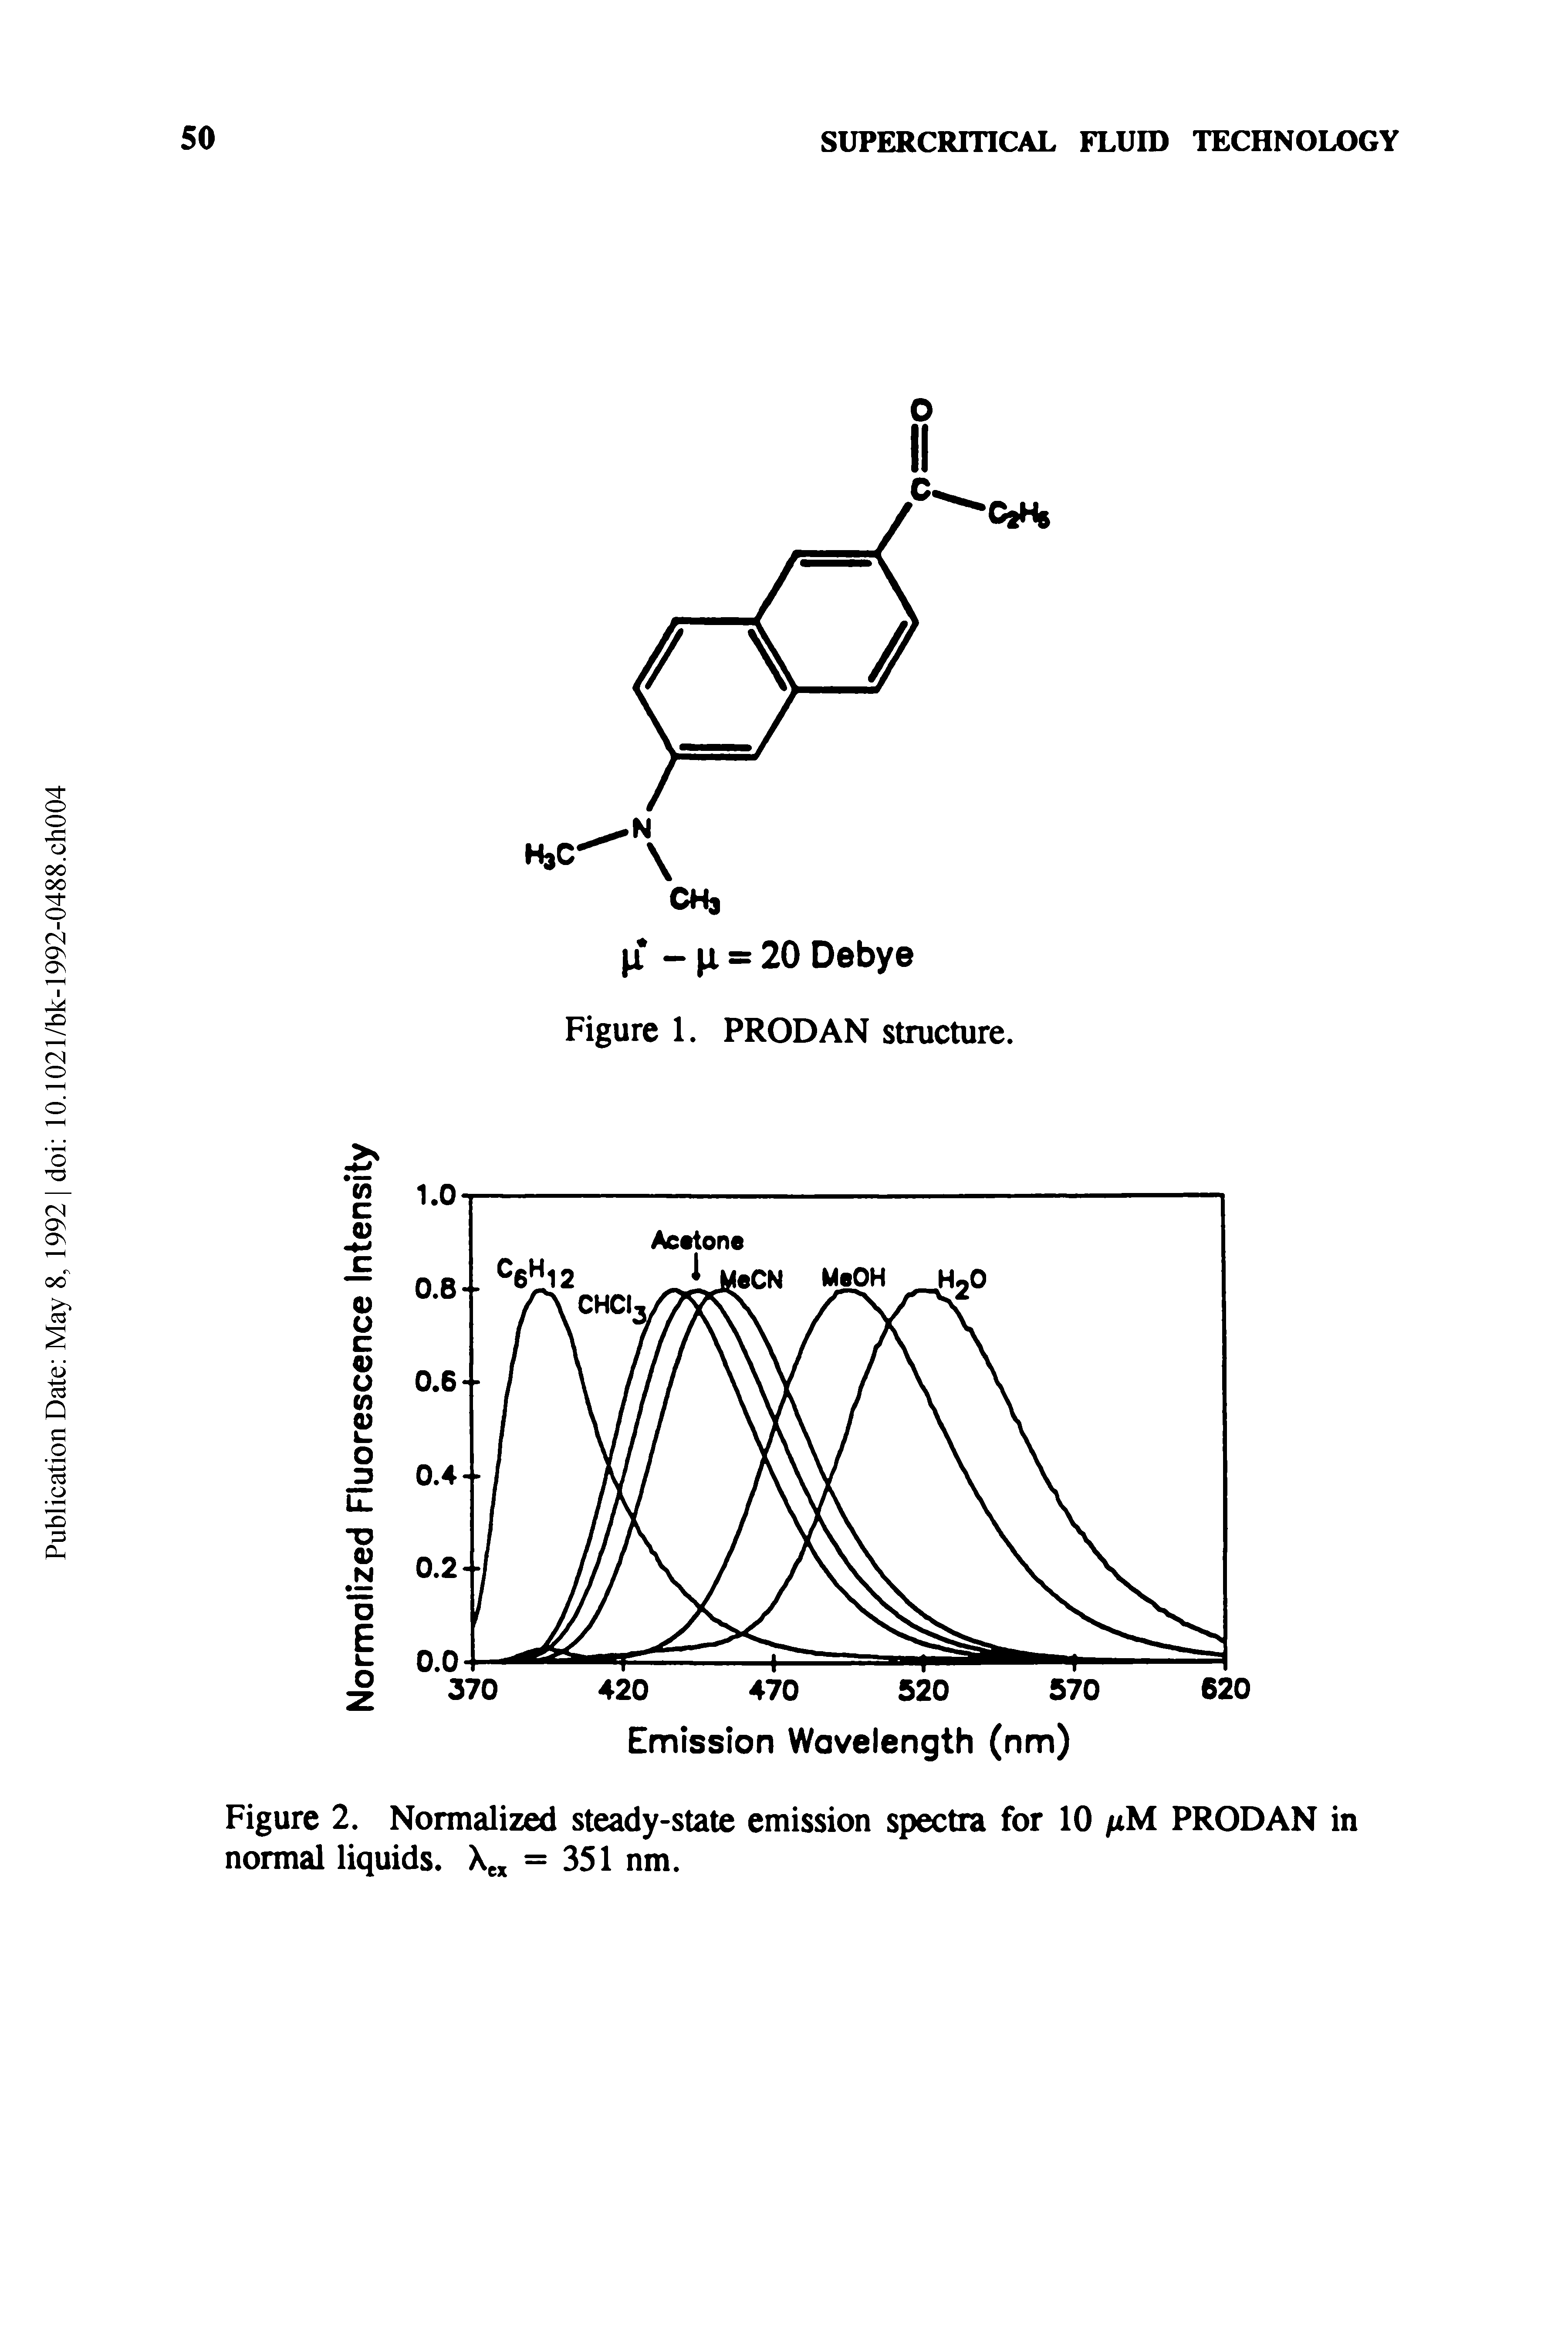 Figure 2. Normalized steady-state emission spectra for 10 /tM PRODAN in normal liquids. Xejt = 351 nm.